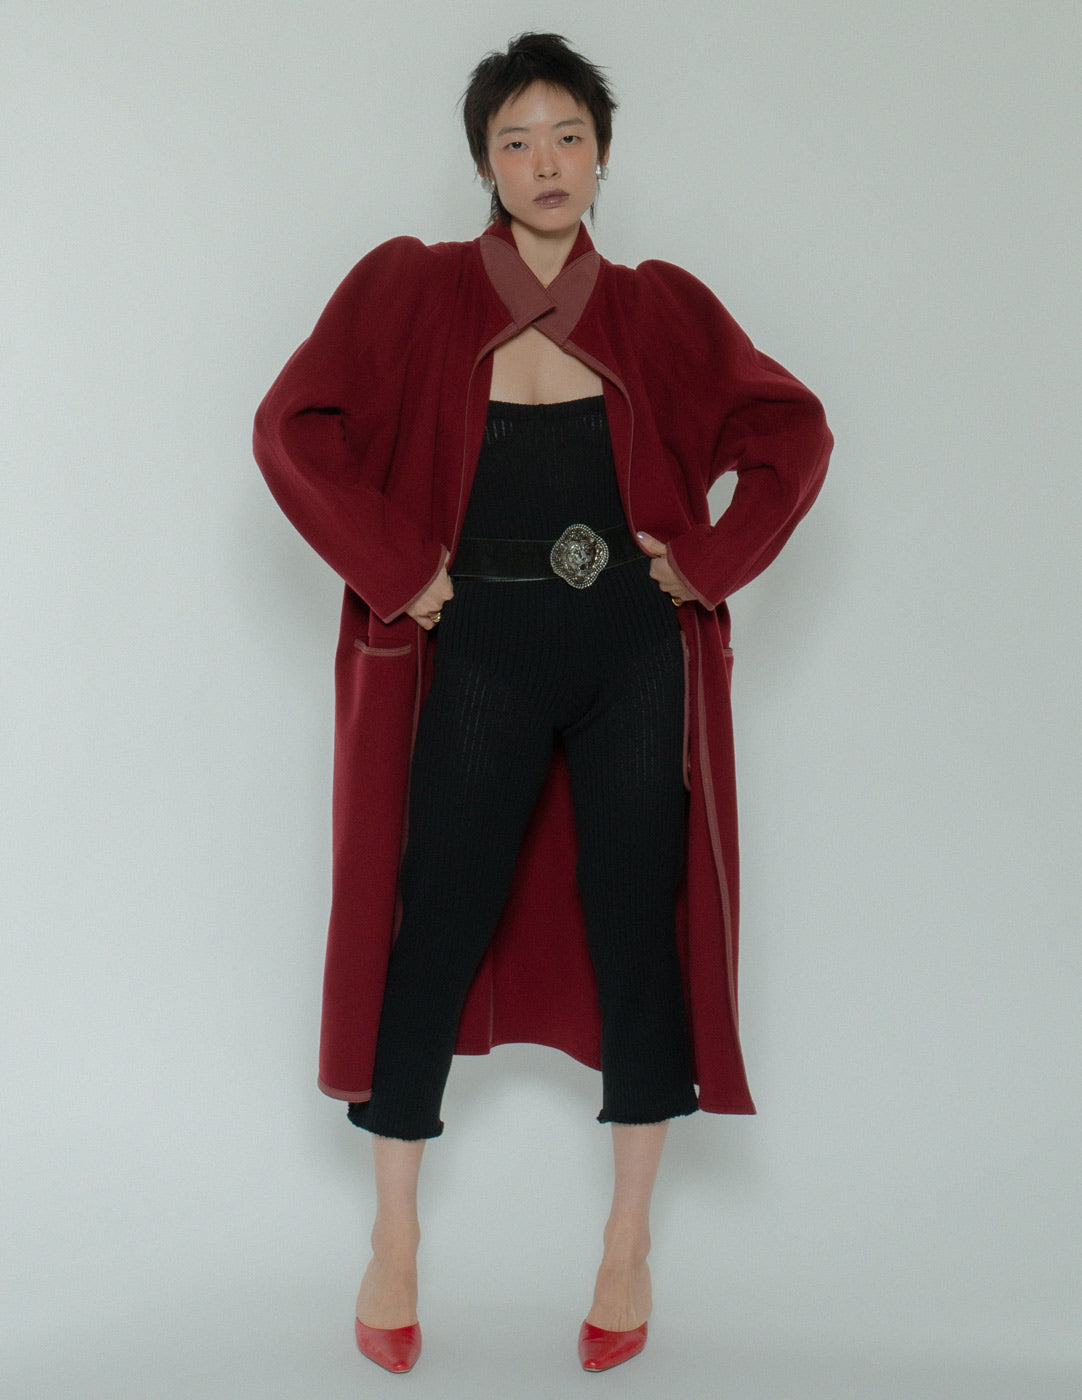 Gianni Versace vintage maroon wool and cashmere coat